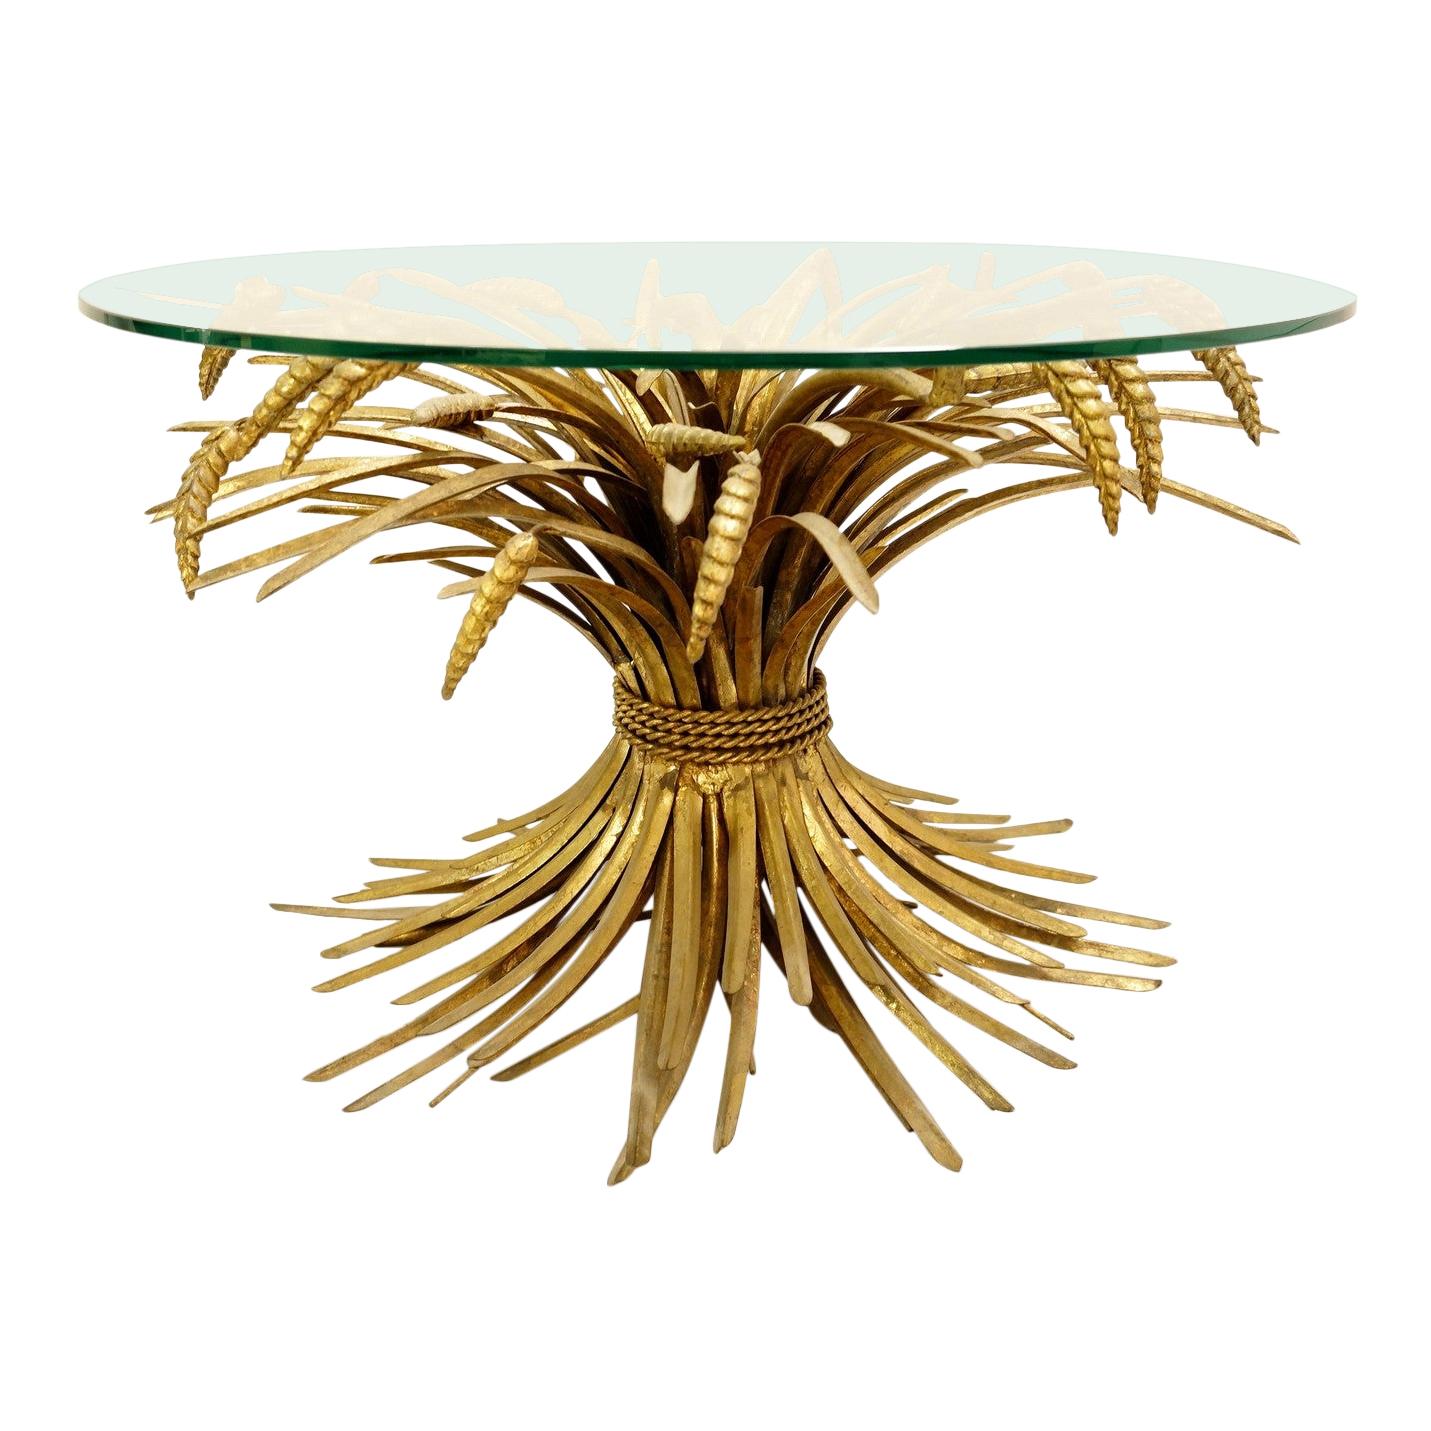 "Coco Chanel" Gilt Sheaf of Wheat Coffee Table, 1970s